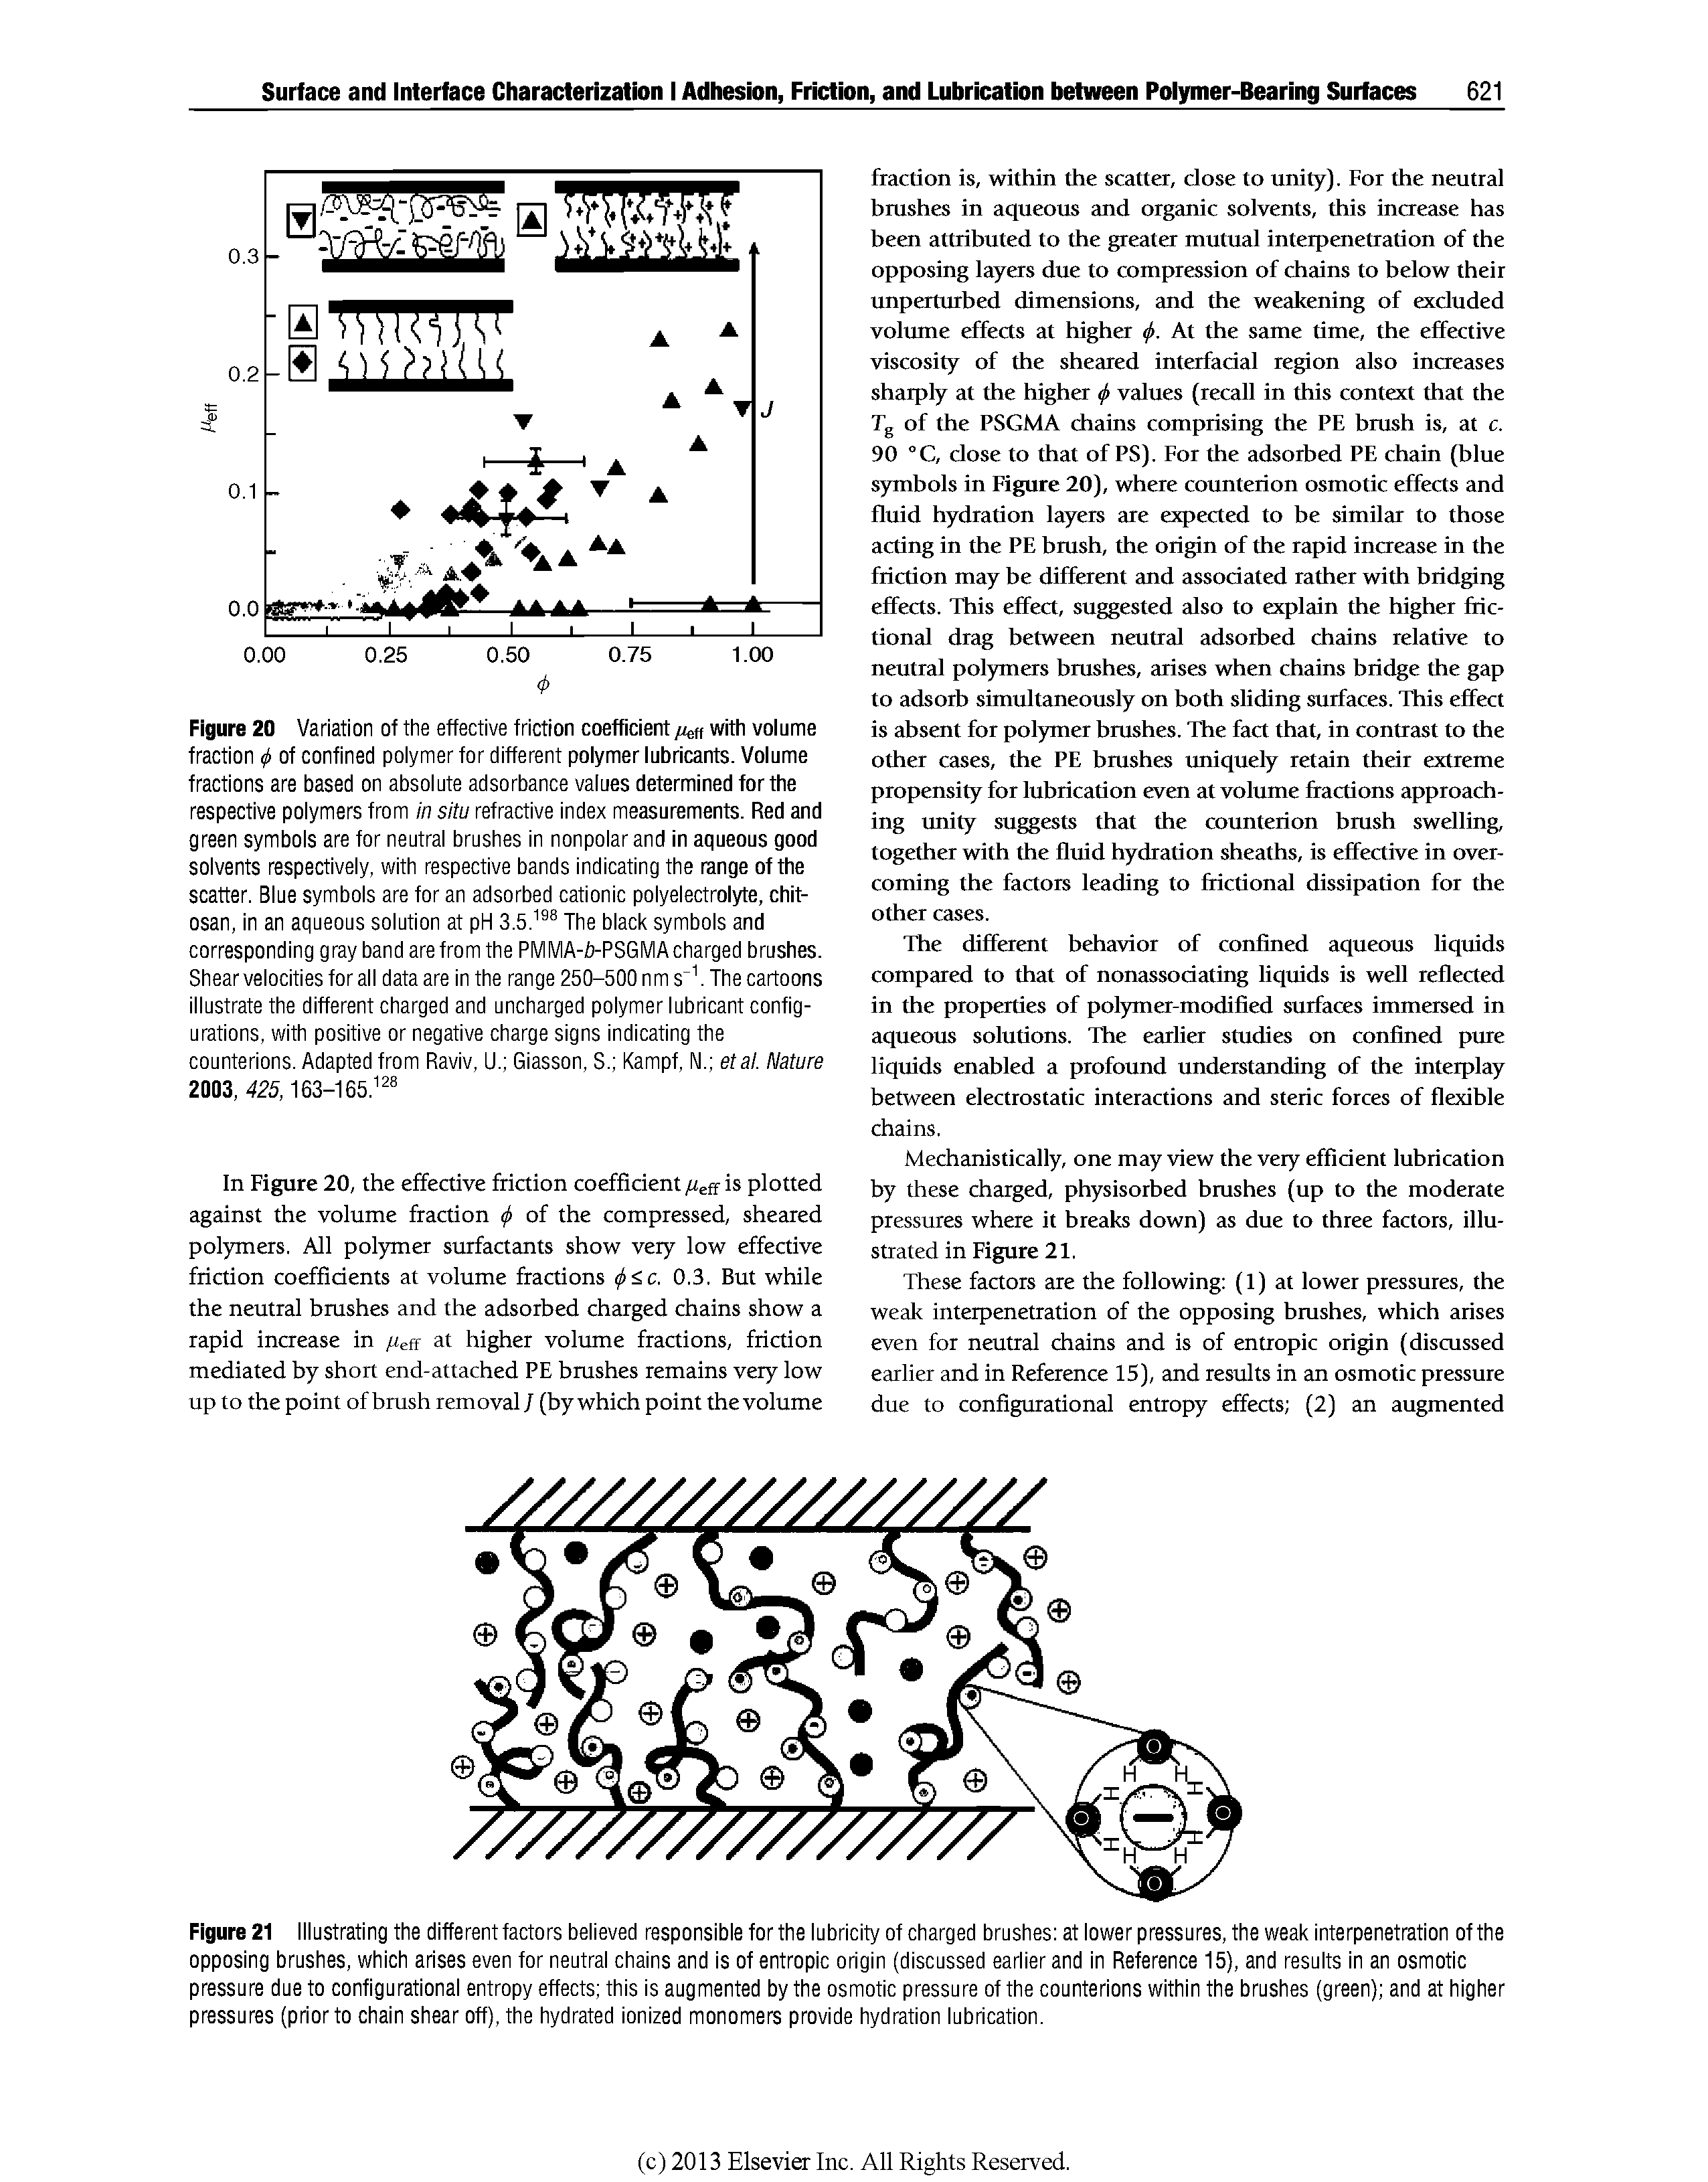 Figure 21 Illustrating the different factors believed responsible for the lubricity of charged brushes at lower pressures, the weak interpenetration of the opposing brushes, which arises even for neutral chains and is of entropic origin (discussed eariier and in Reference 15), and results in an osmotic pressure due to configurational entropy effects this is augmented by the osmotic pressure of the counterions within the brushes (green) and at higher pressures (prior to chain shear off), the hydrated ionized monomers provide hydration lubrication.